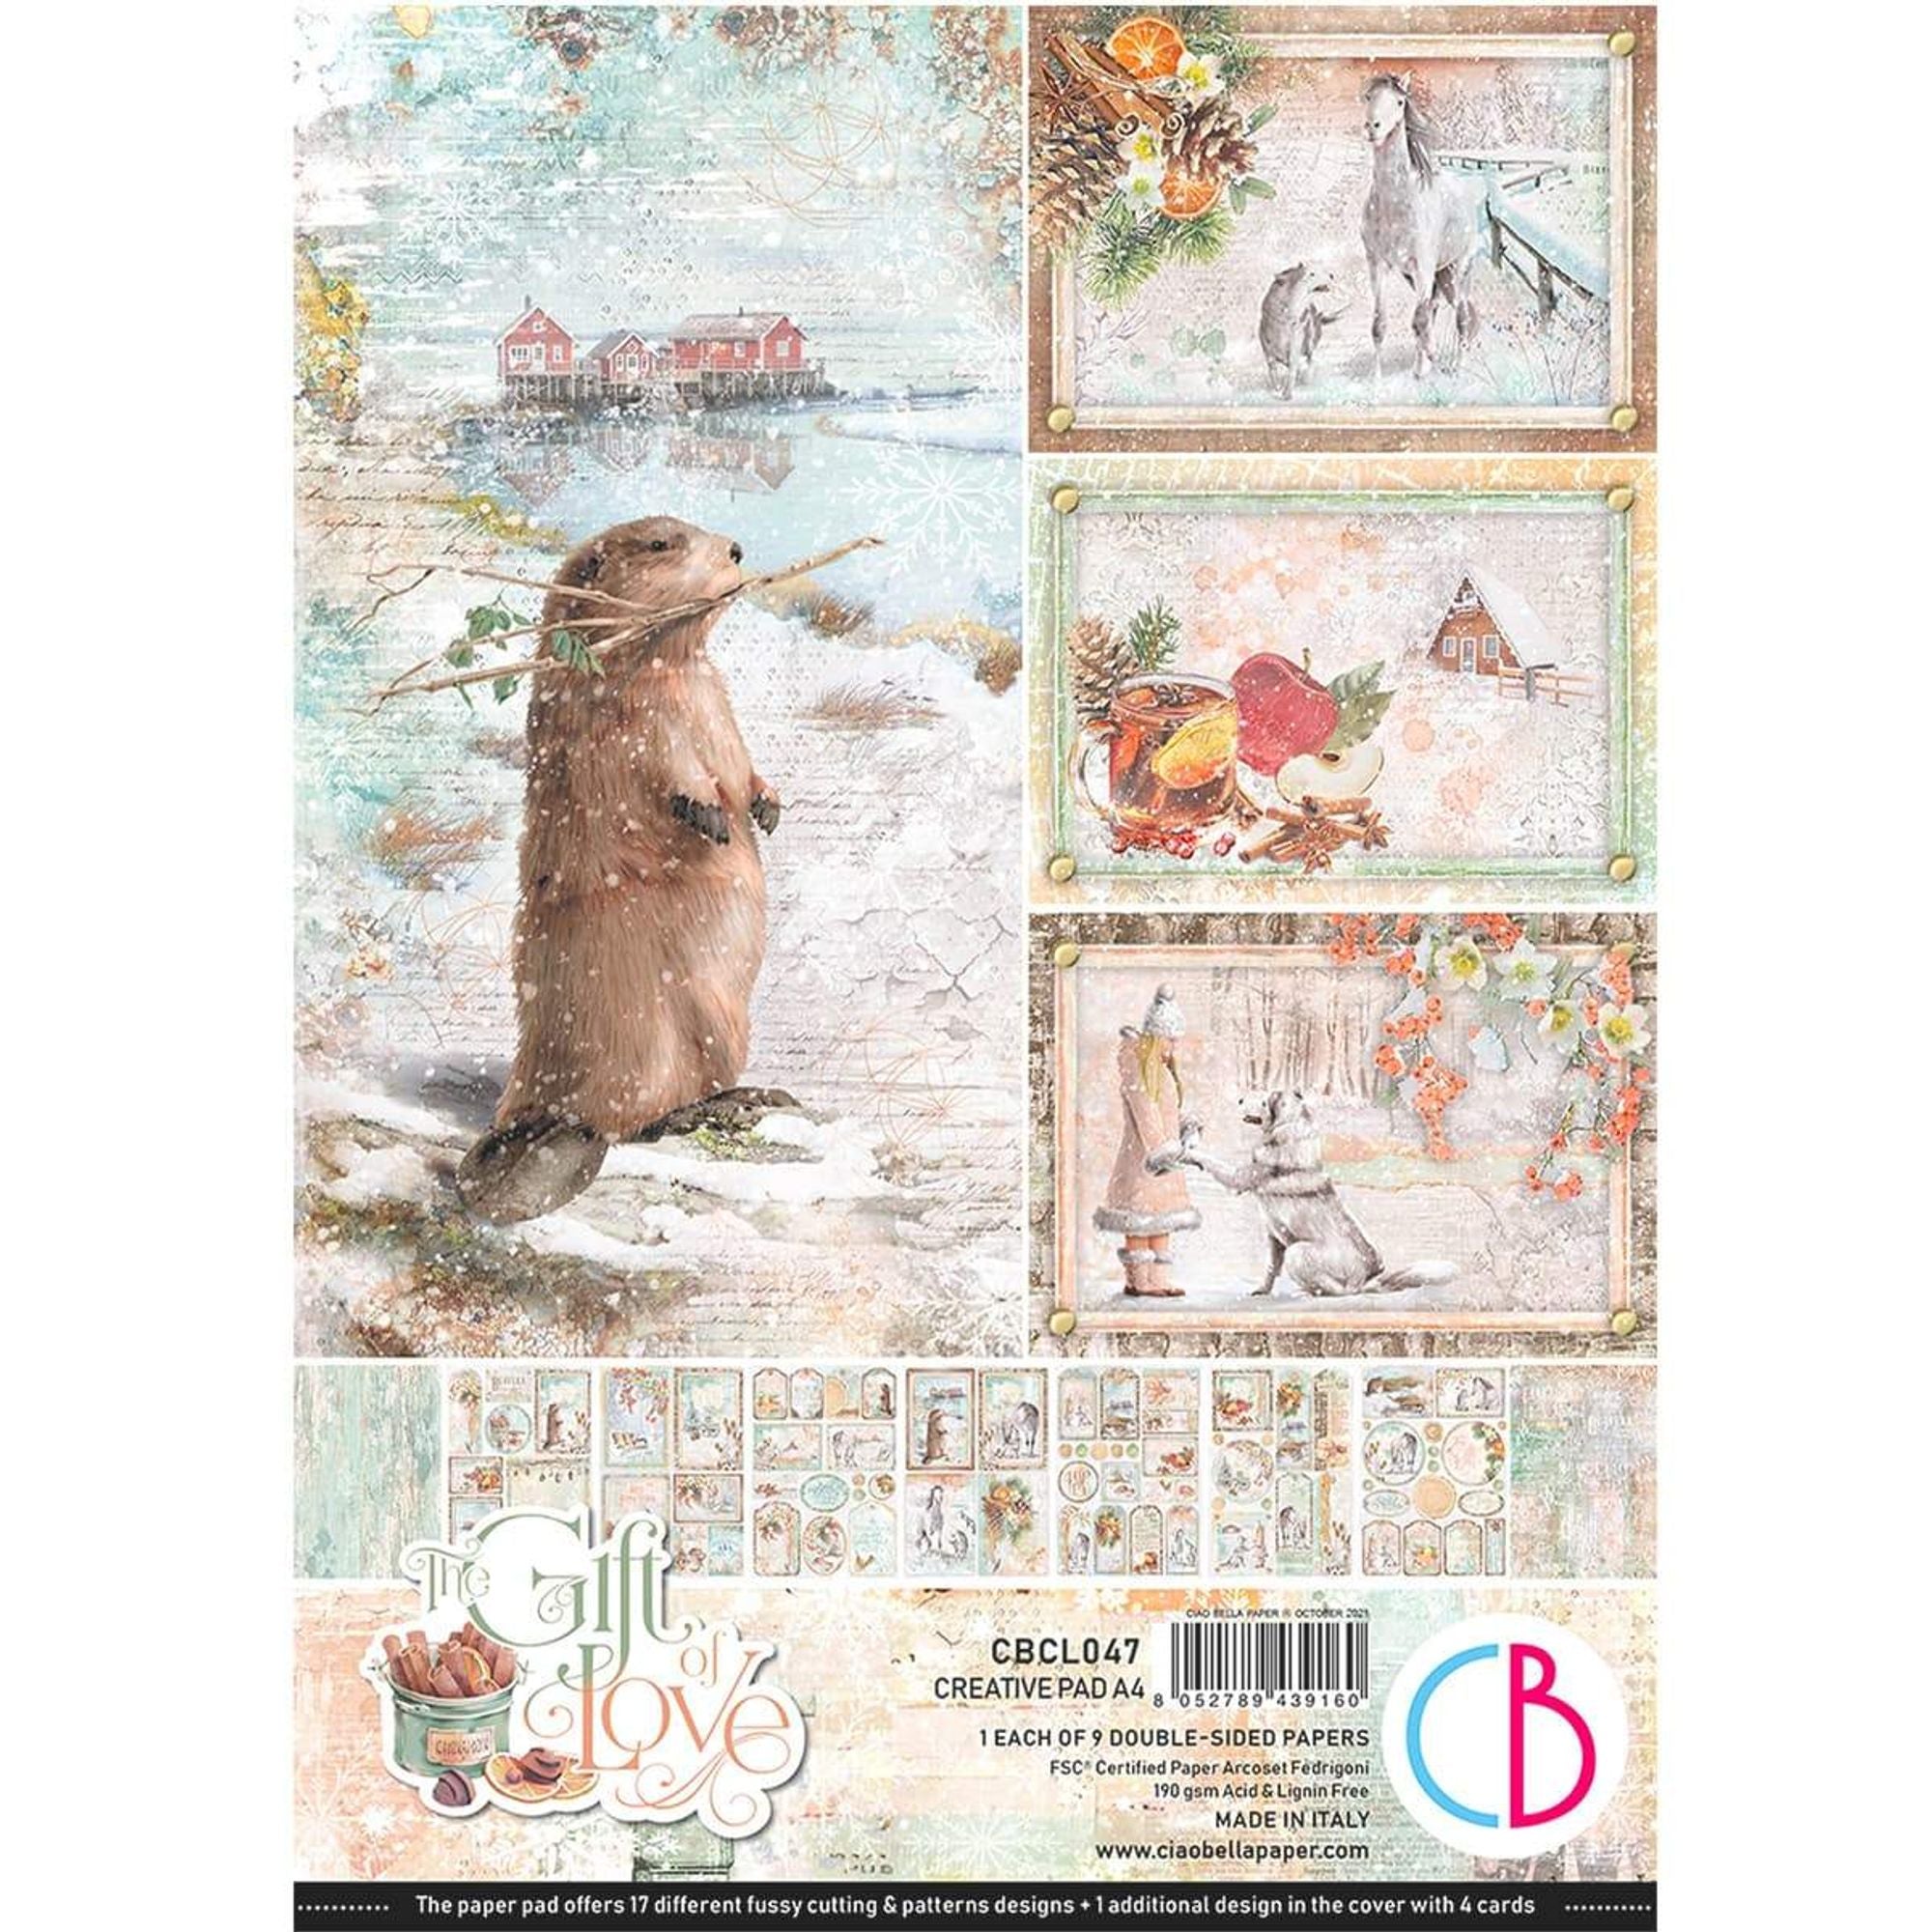 Ciao Bella The Gift of Love Creative Pad A4 9/Pkg